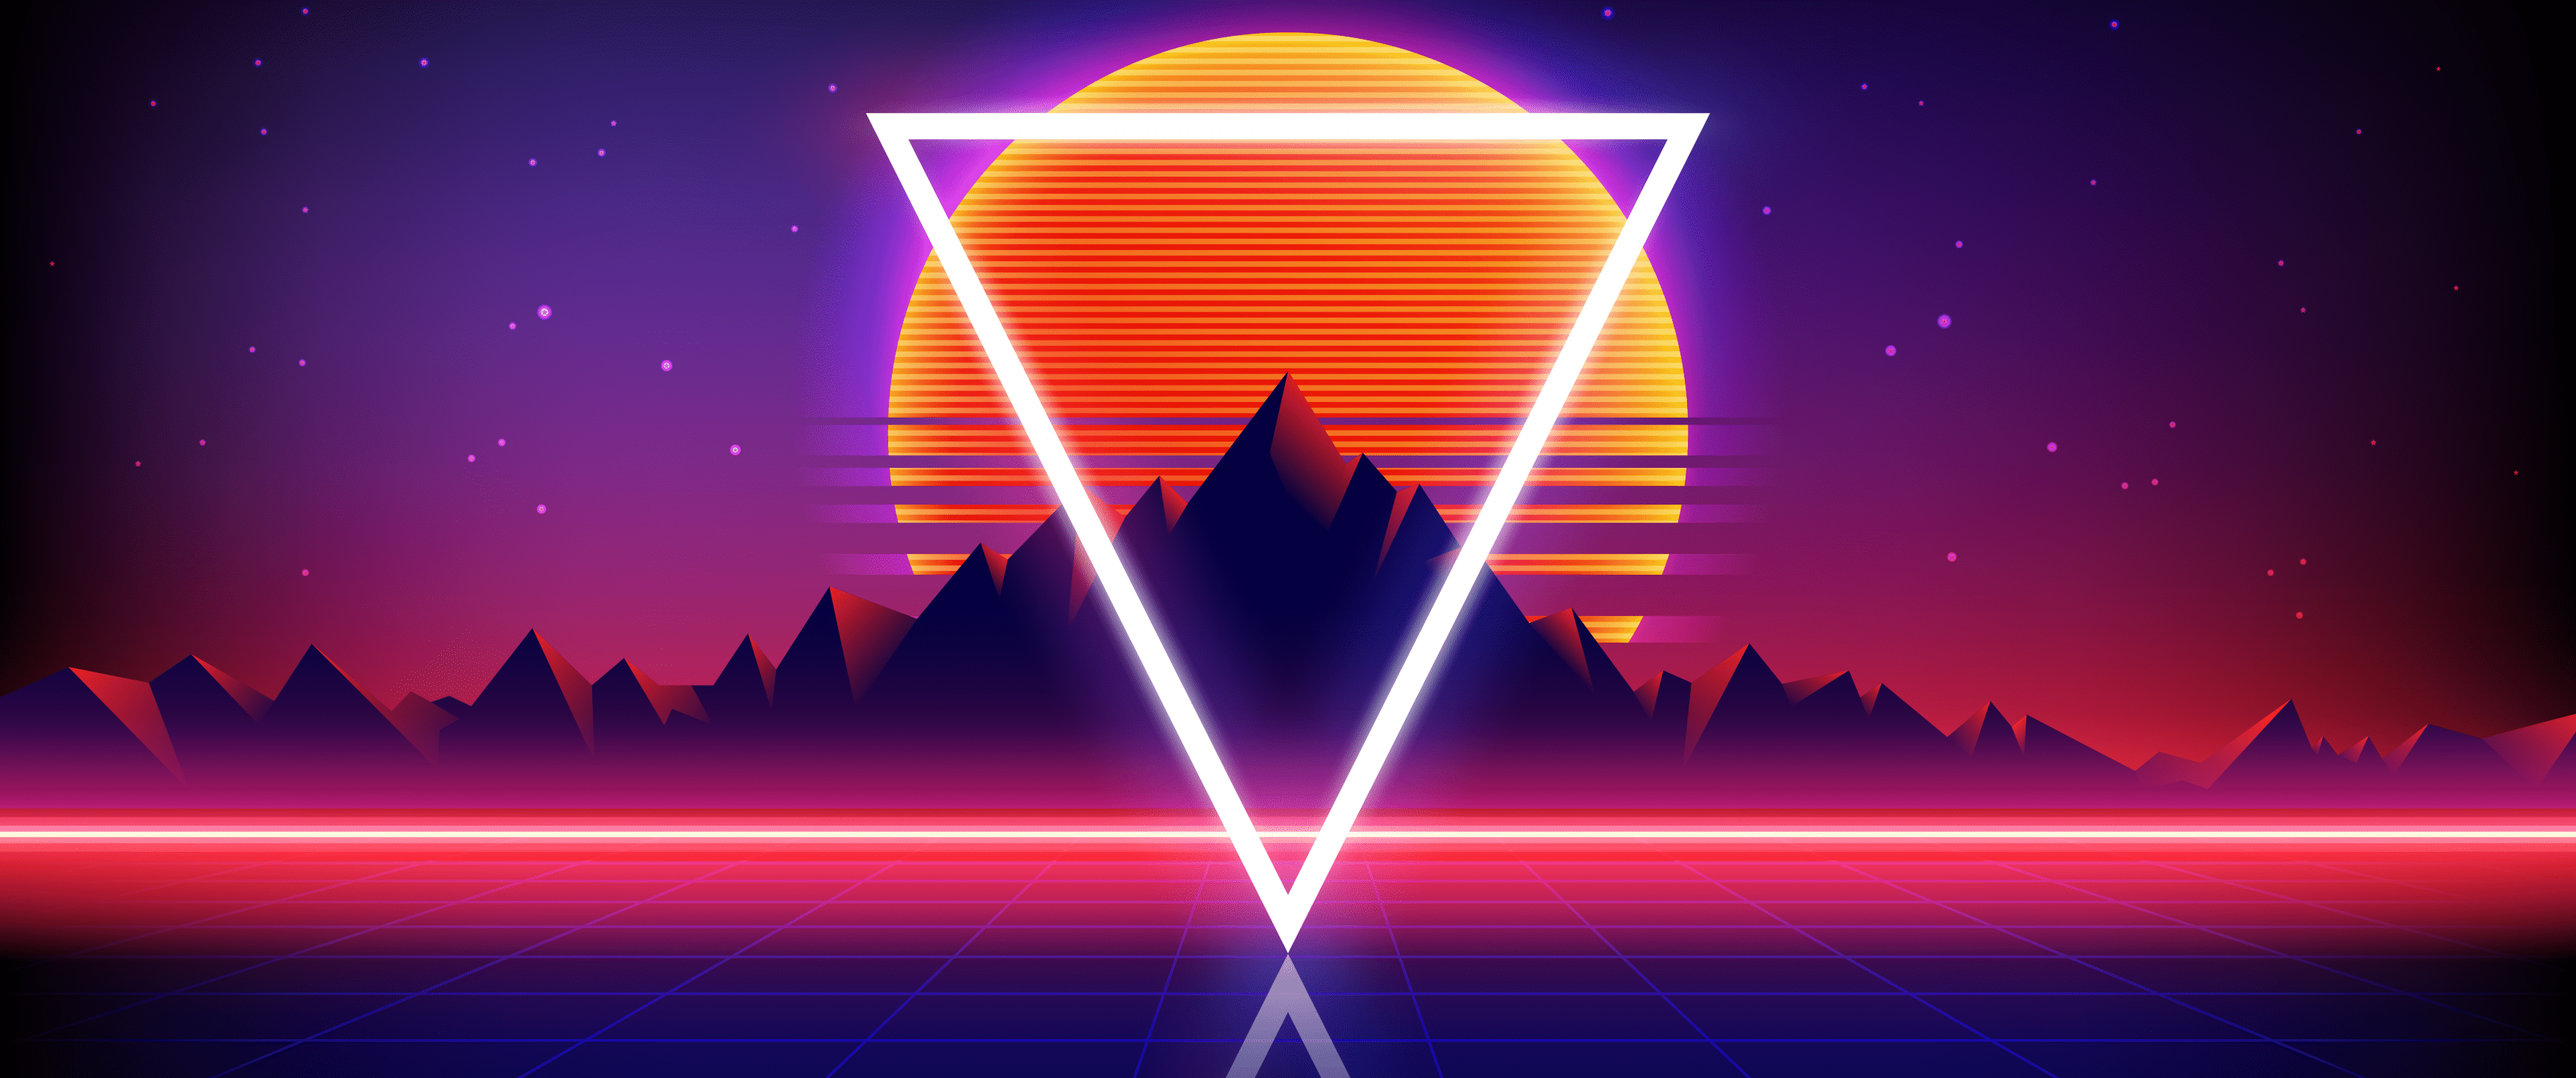 A neon colored image of the sun and mountains - 3440x1440